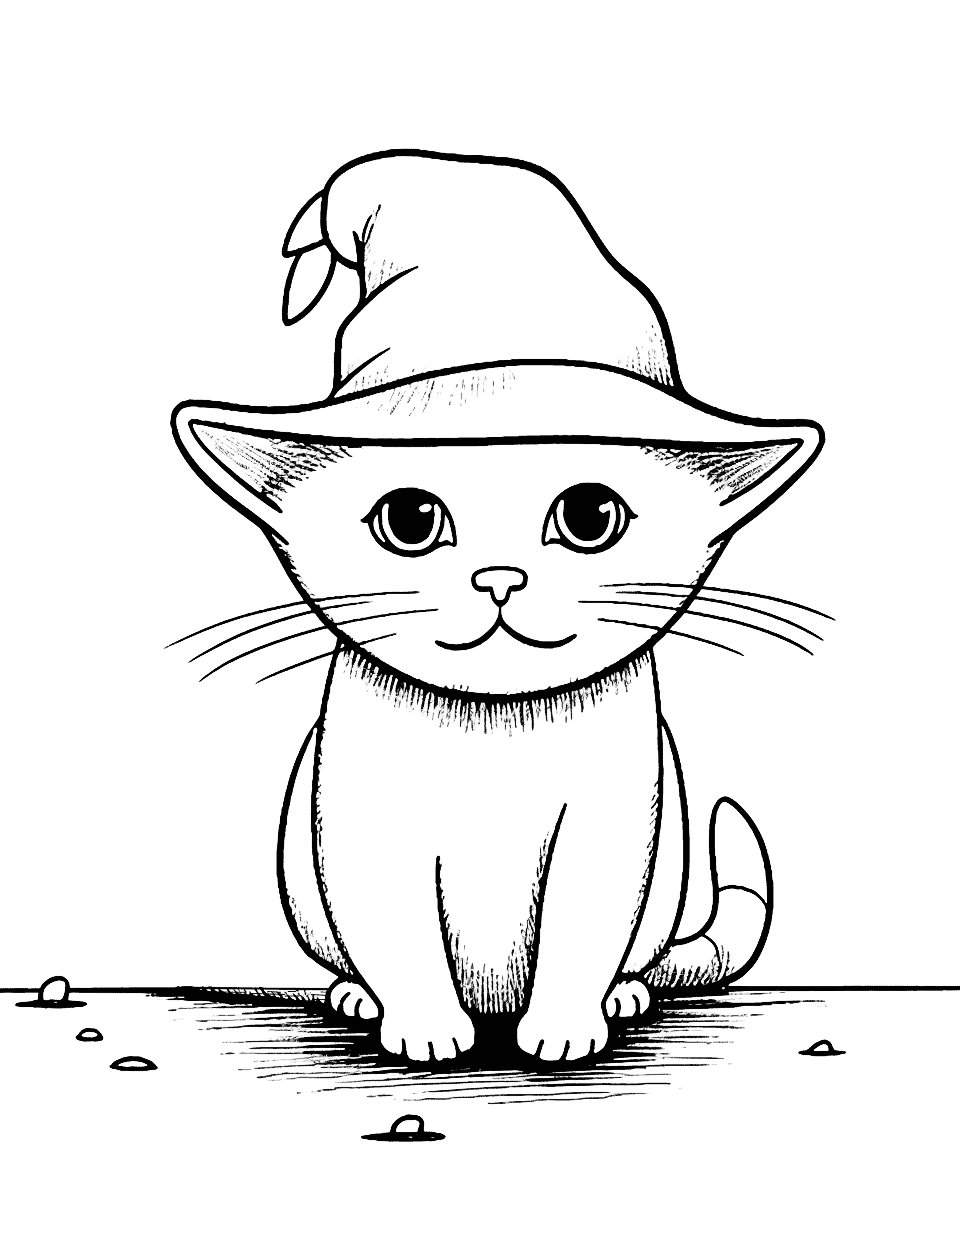 Cute Cat in a Witch's Hat for Halloween Coloring Page - A cute cat curiously peeking from under a big witch’s hat.